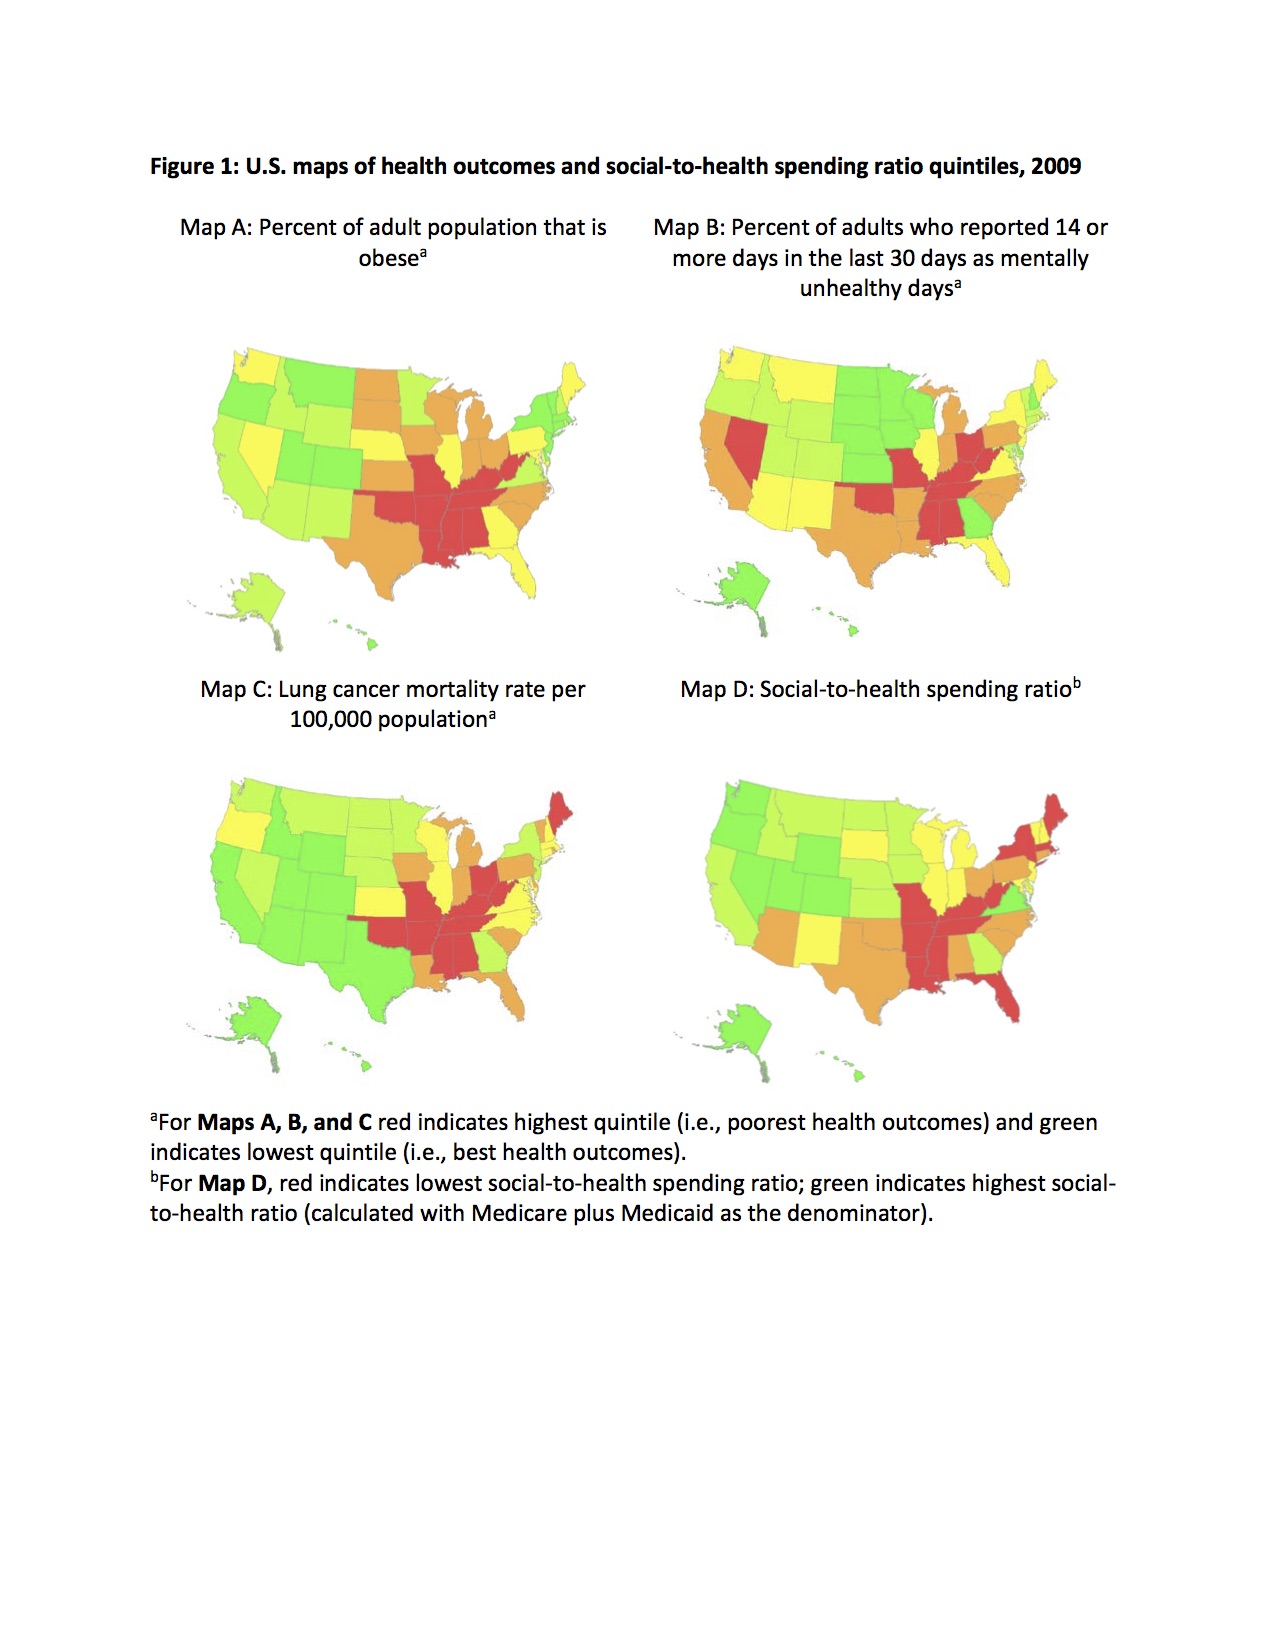 U.S. maps of health outcomes and social-to-health spending ratio quintiles, 2009